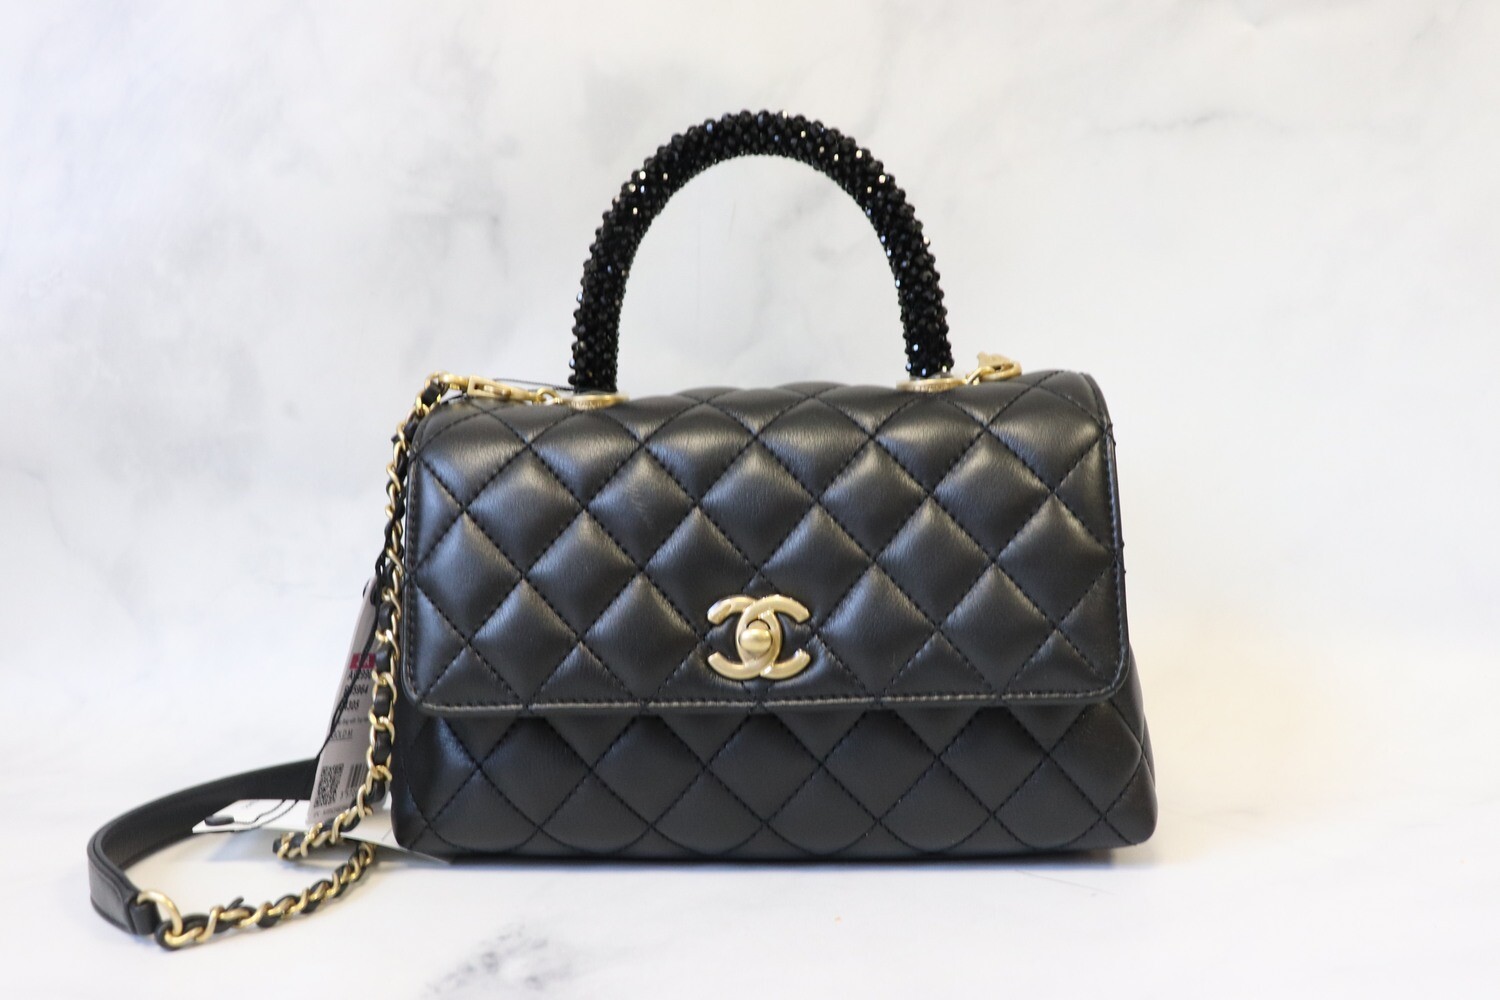 Chanel Coco Handle Mini, Black Calfskin Strass Handle, As New in